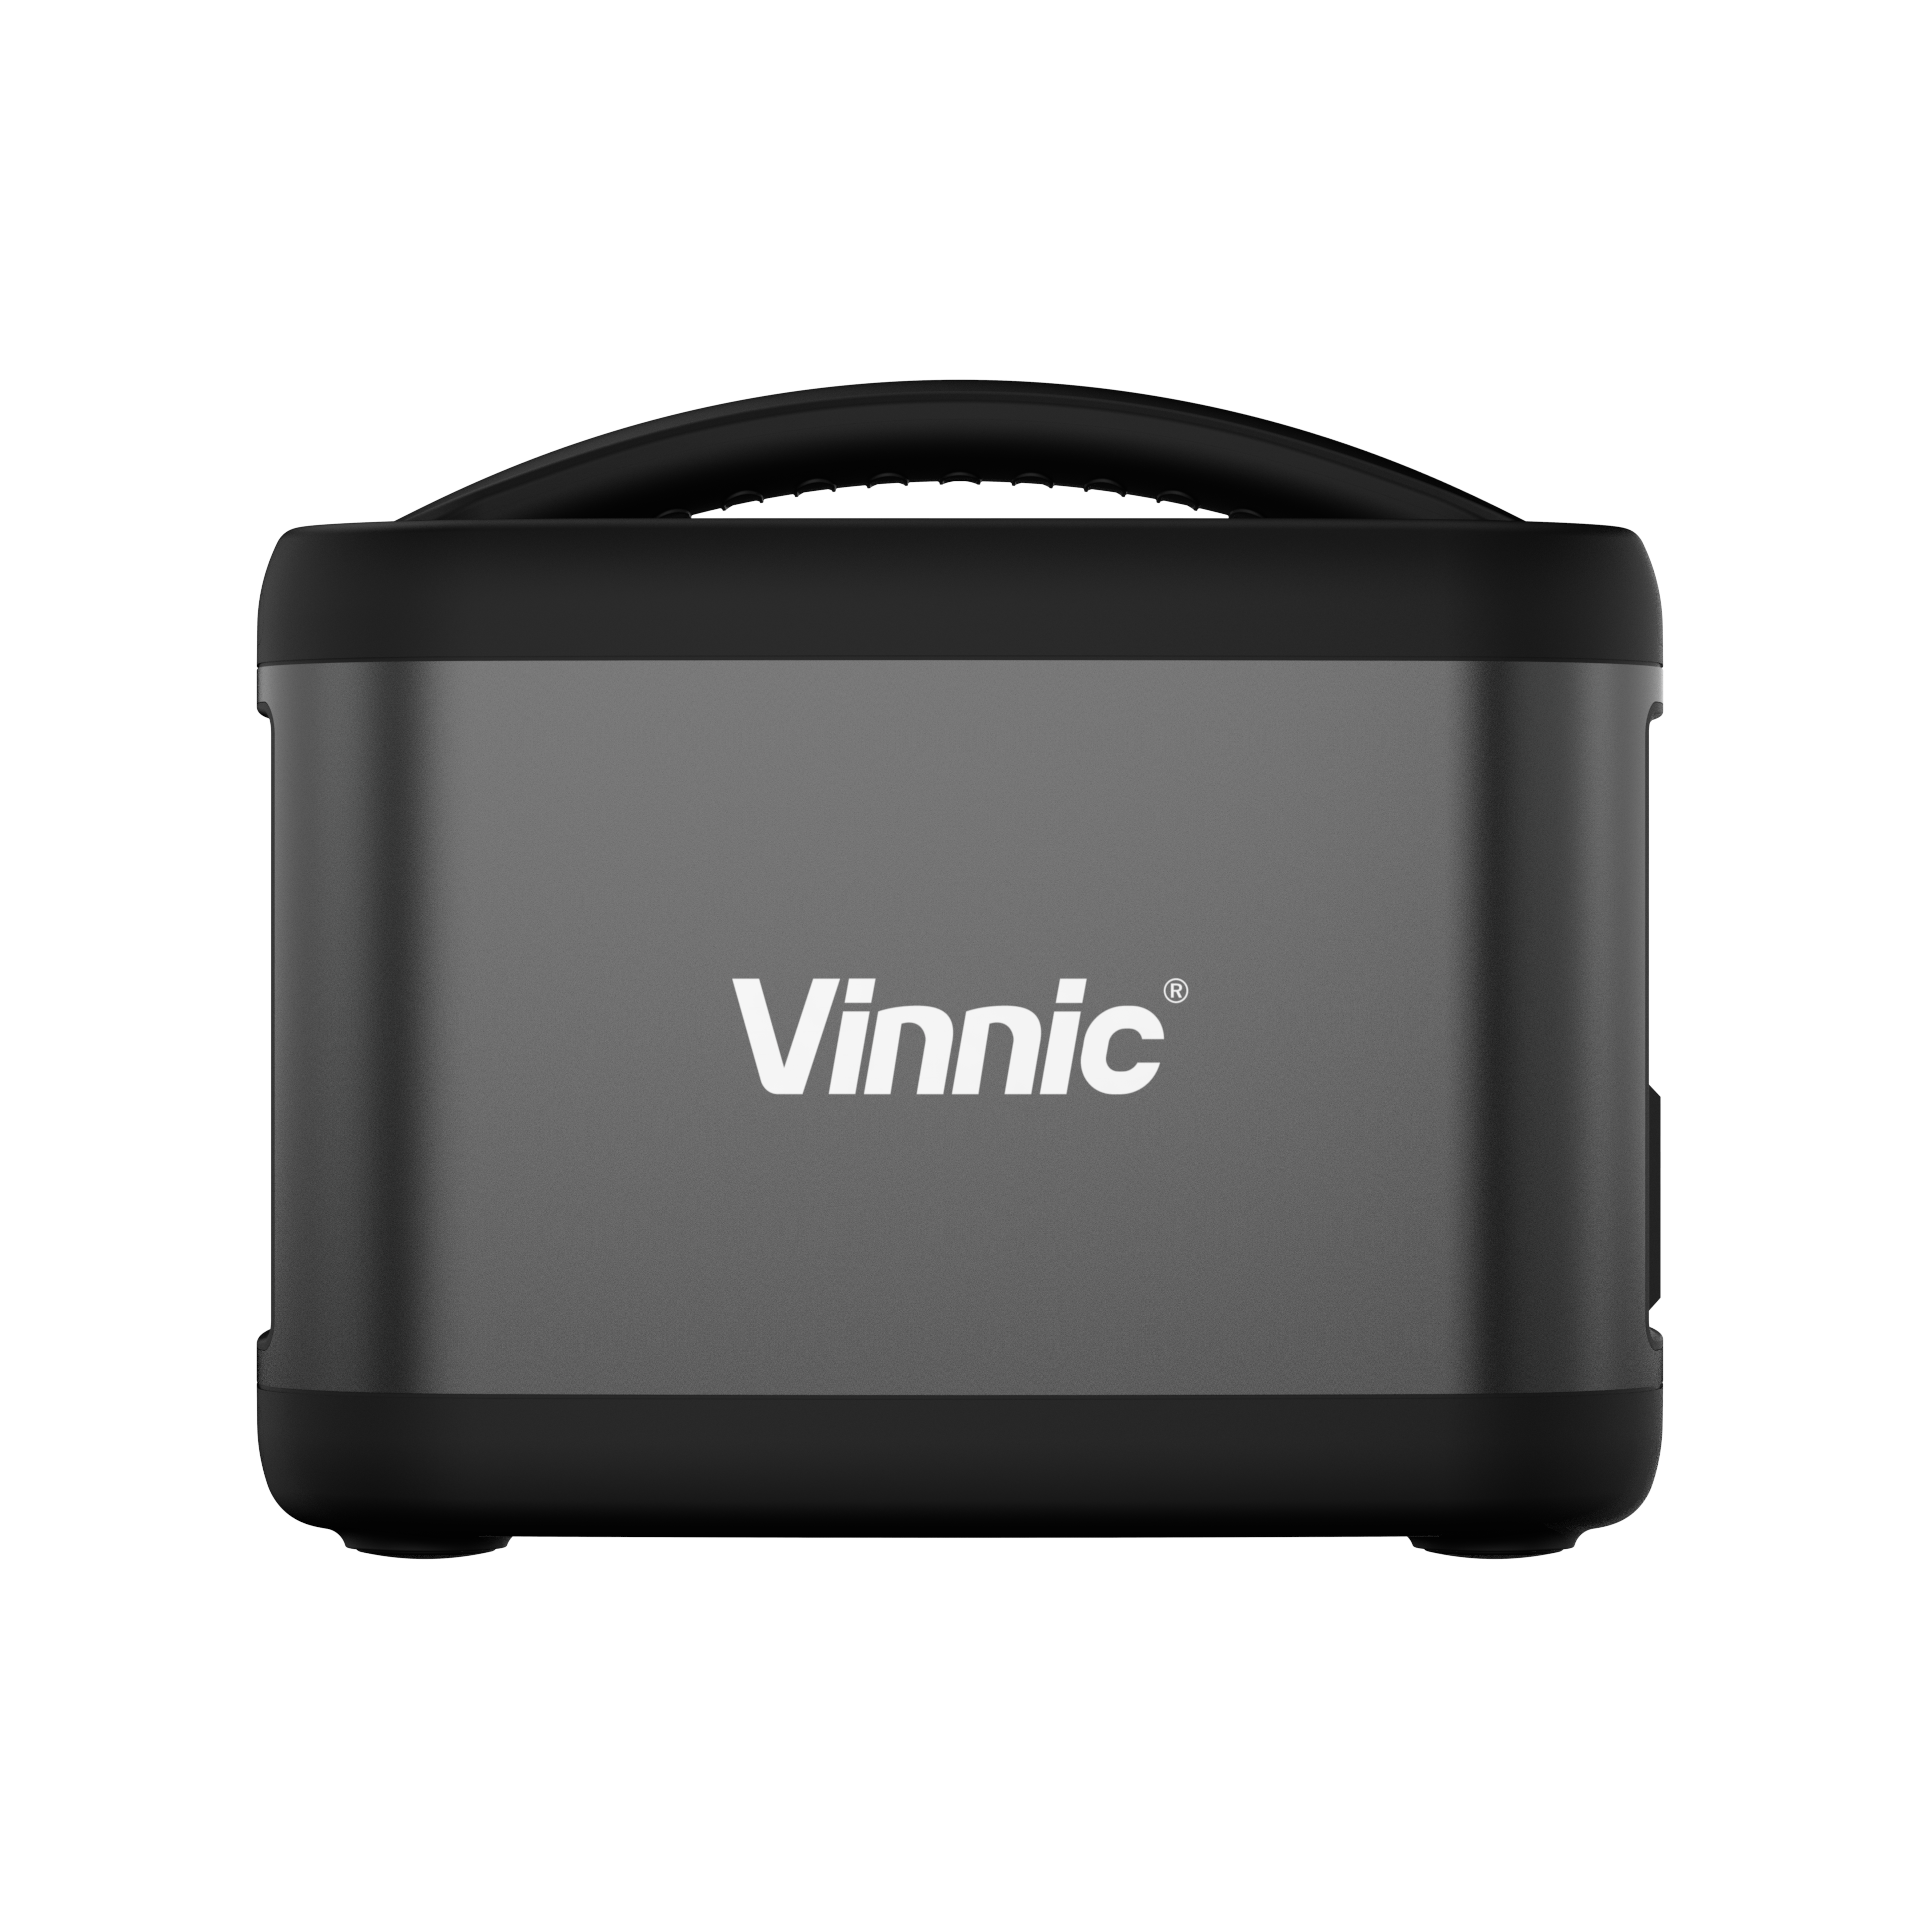 Vinnic PS500W-532Wh 144,000 mAh Portable Power Station